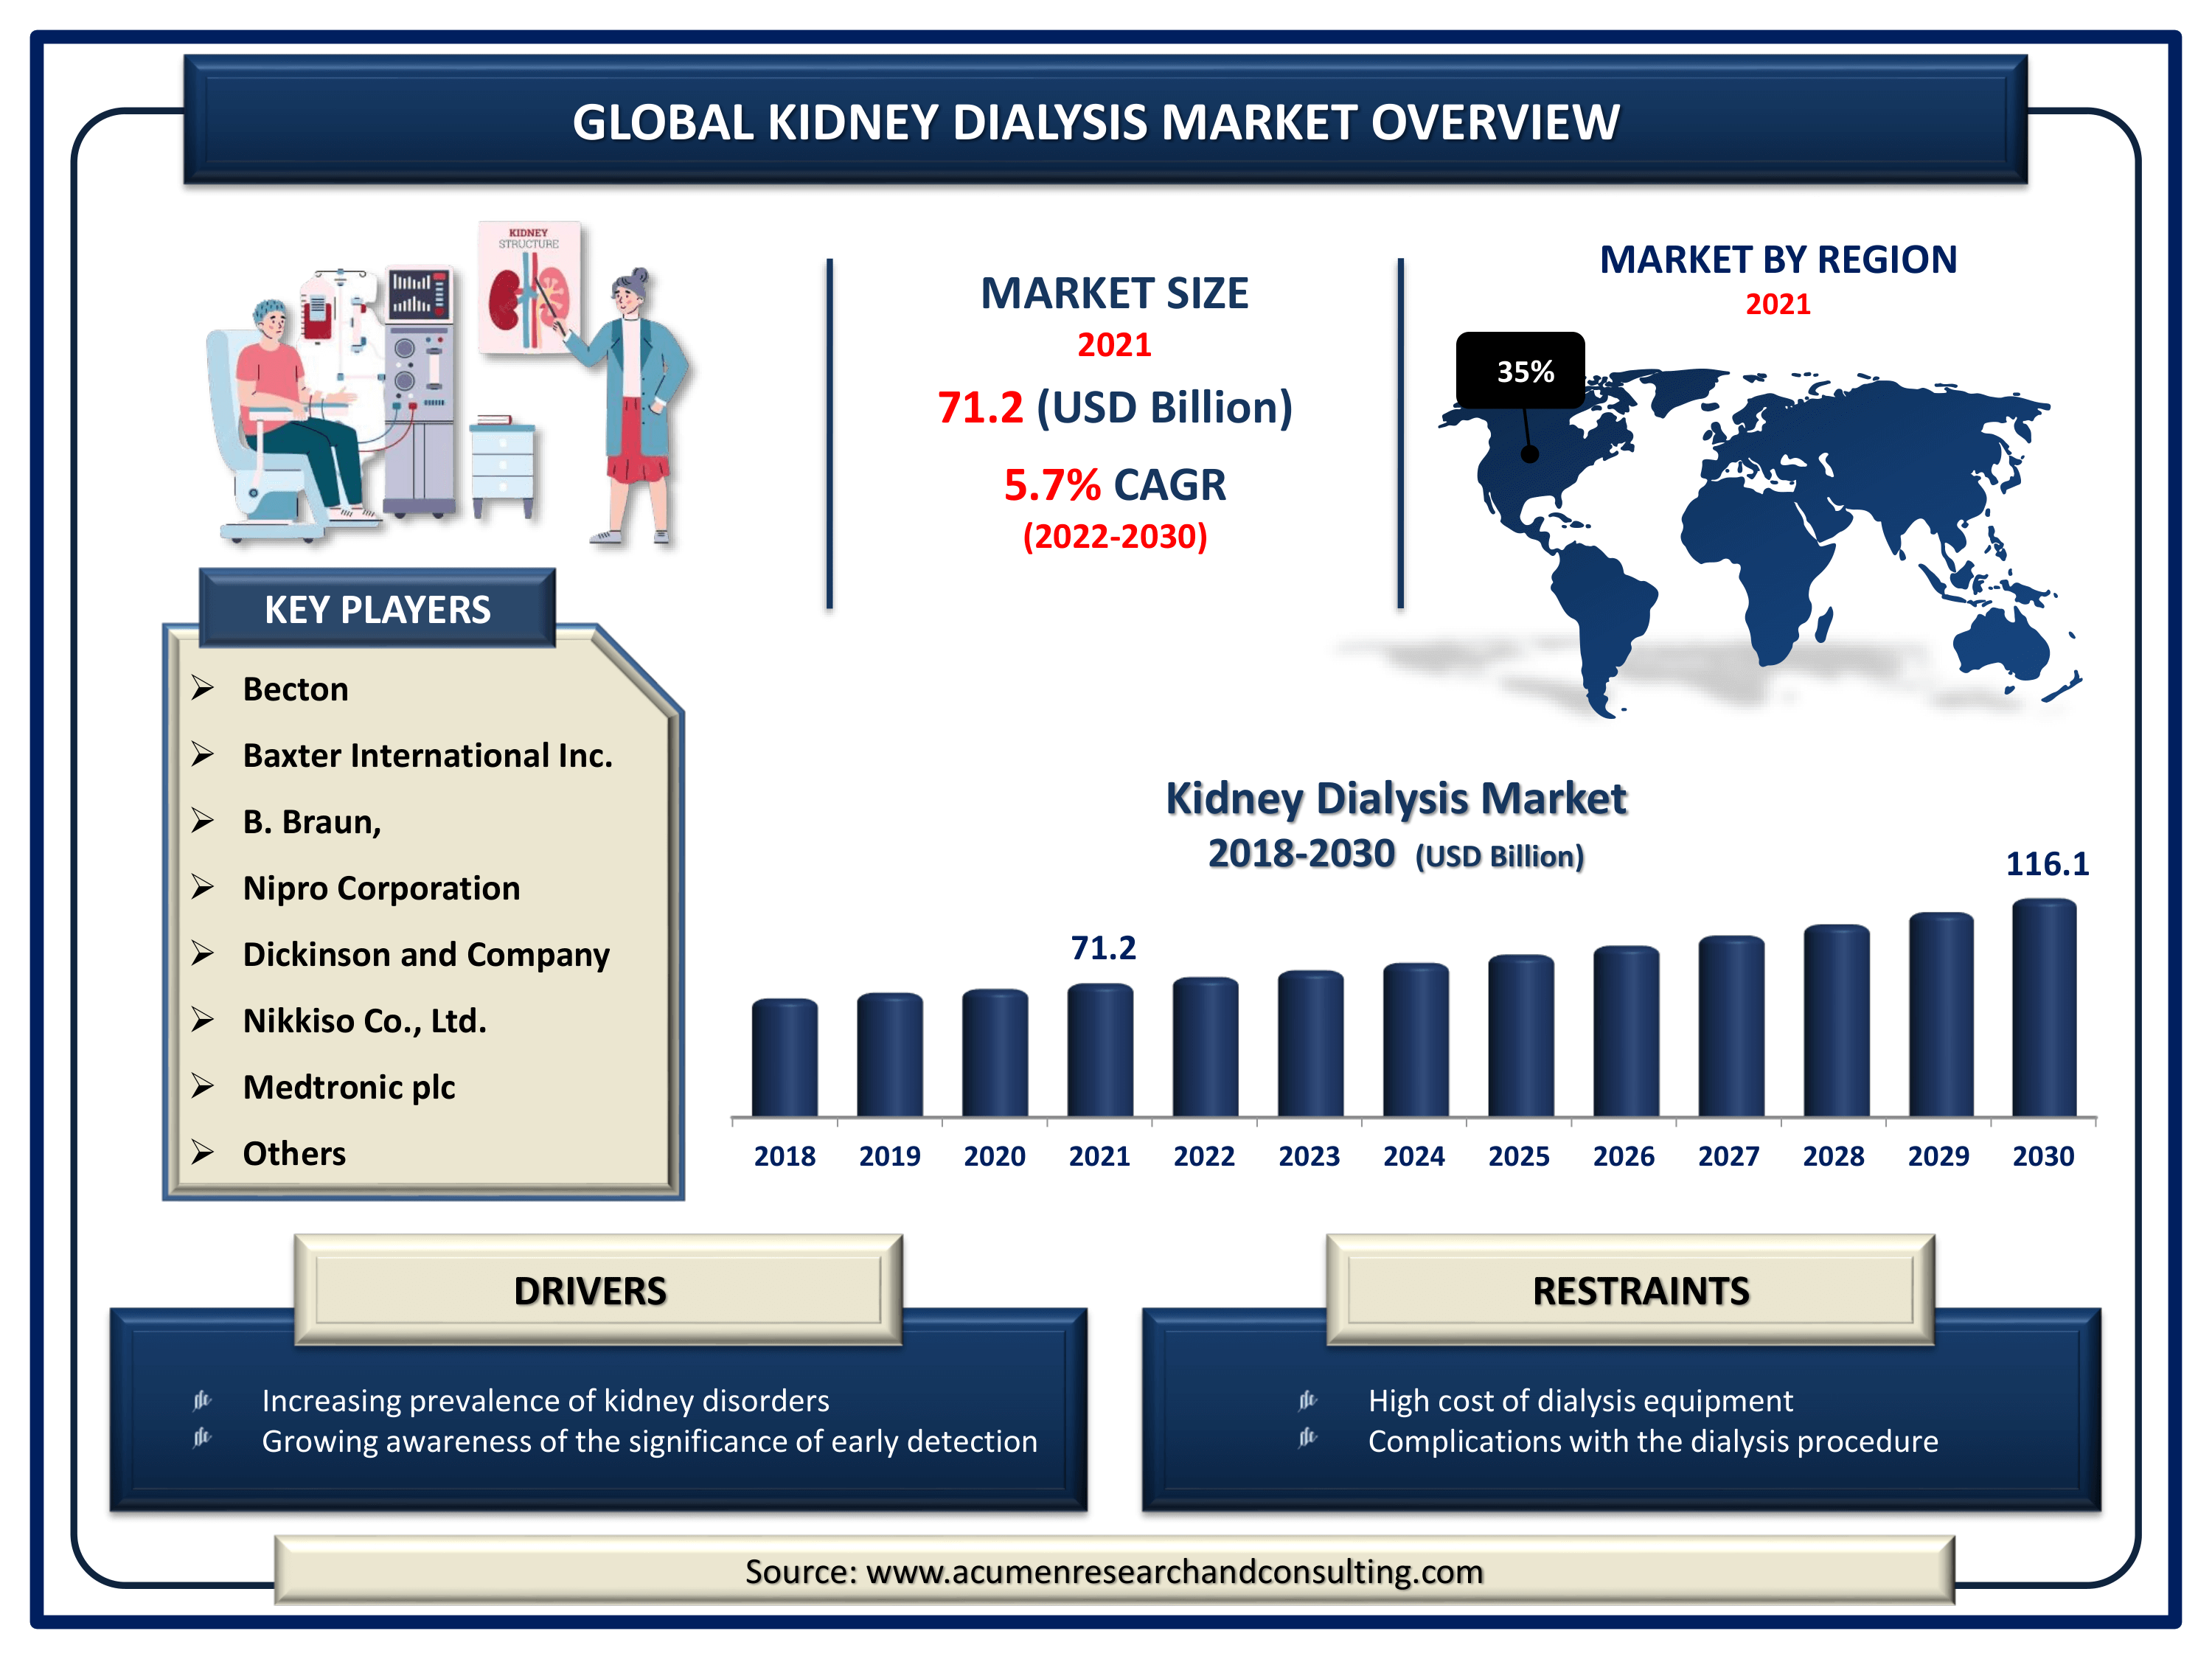 Global kidney dialysis market revenue is expected to increase by USD 116.1 billion by 2030, with a 5.7% CAGR from 2022 to 2030